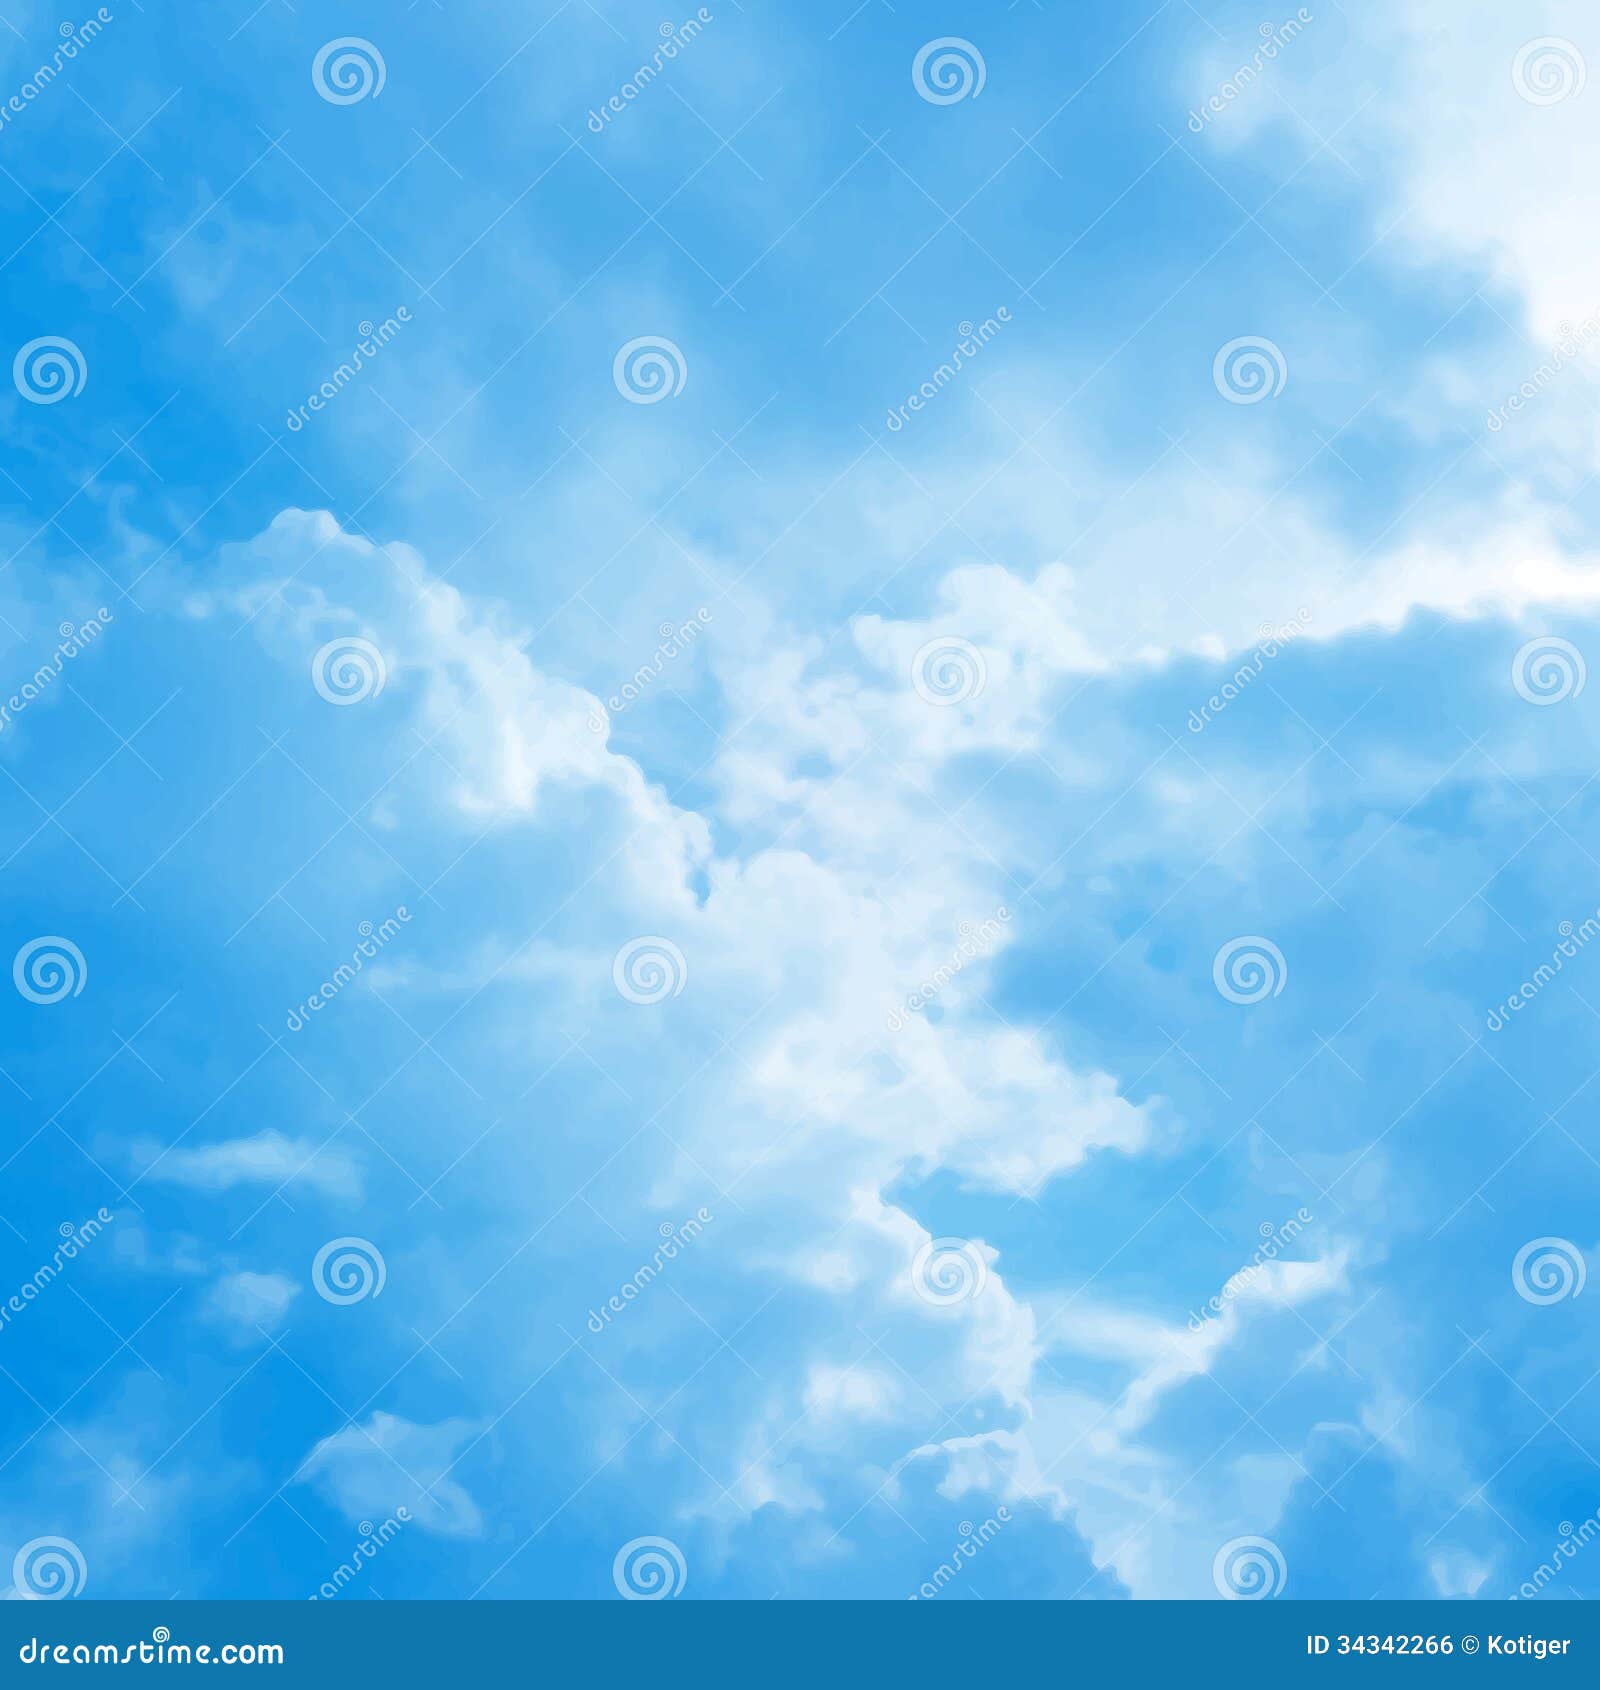 Blue cloudy sky background stock vector. Illustration of spring - 34342266